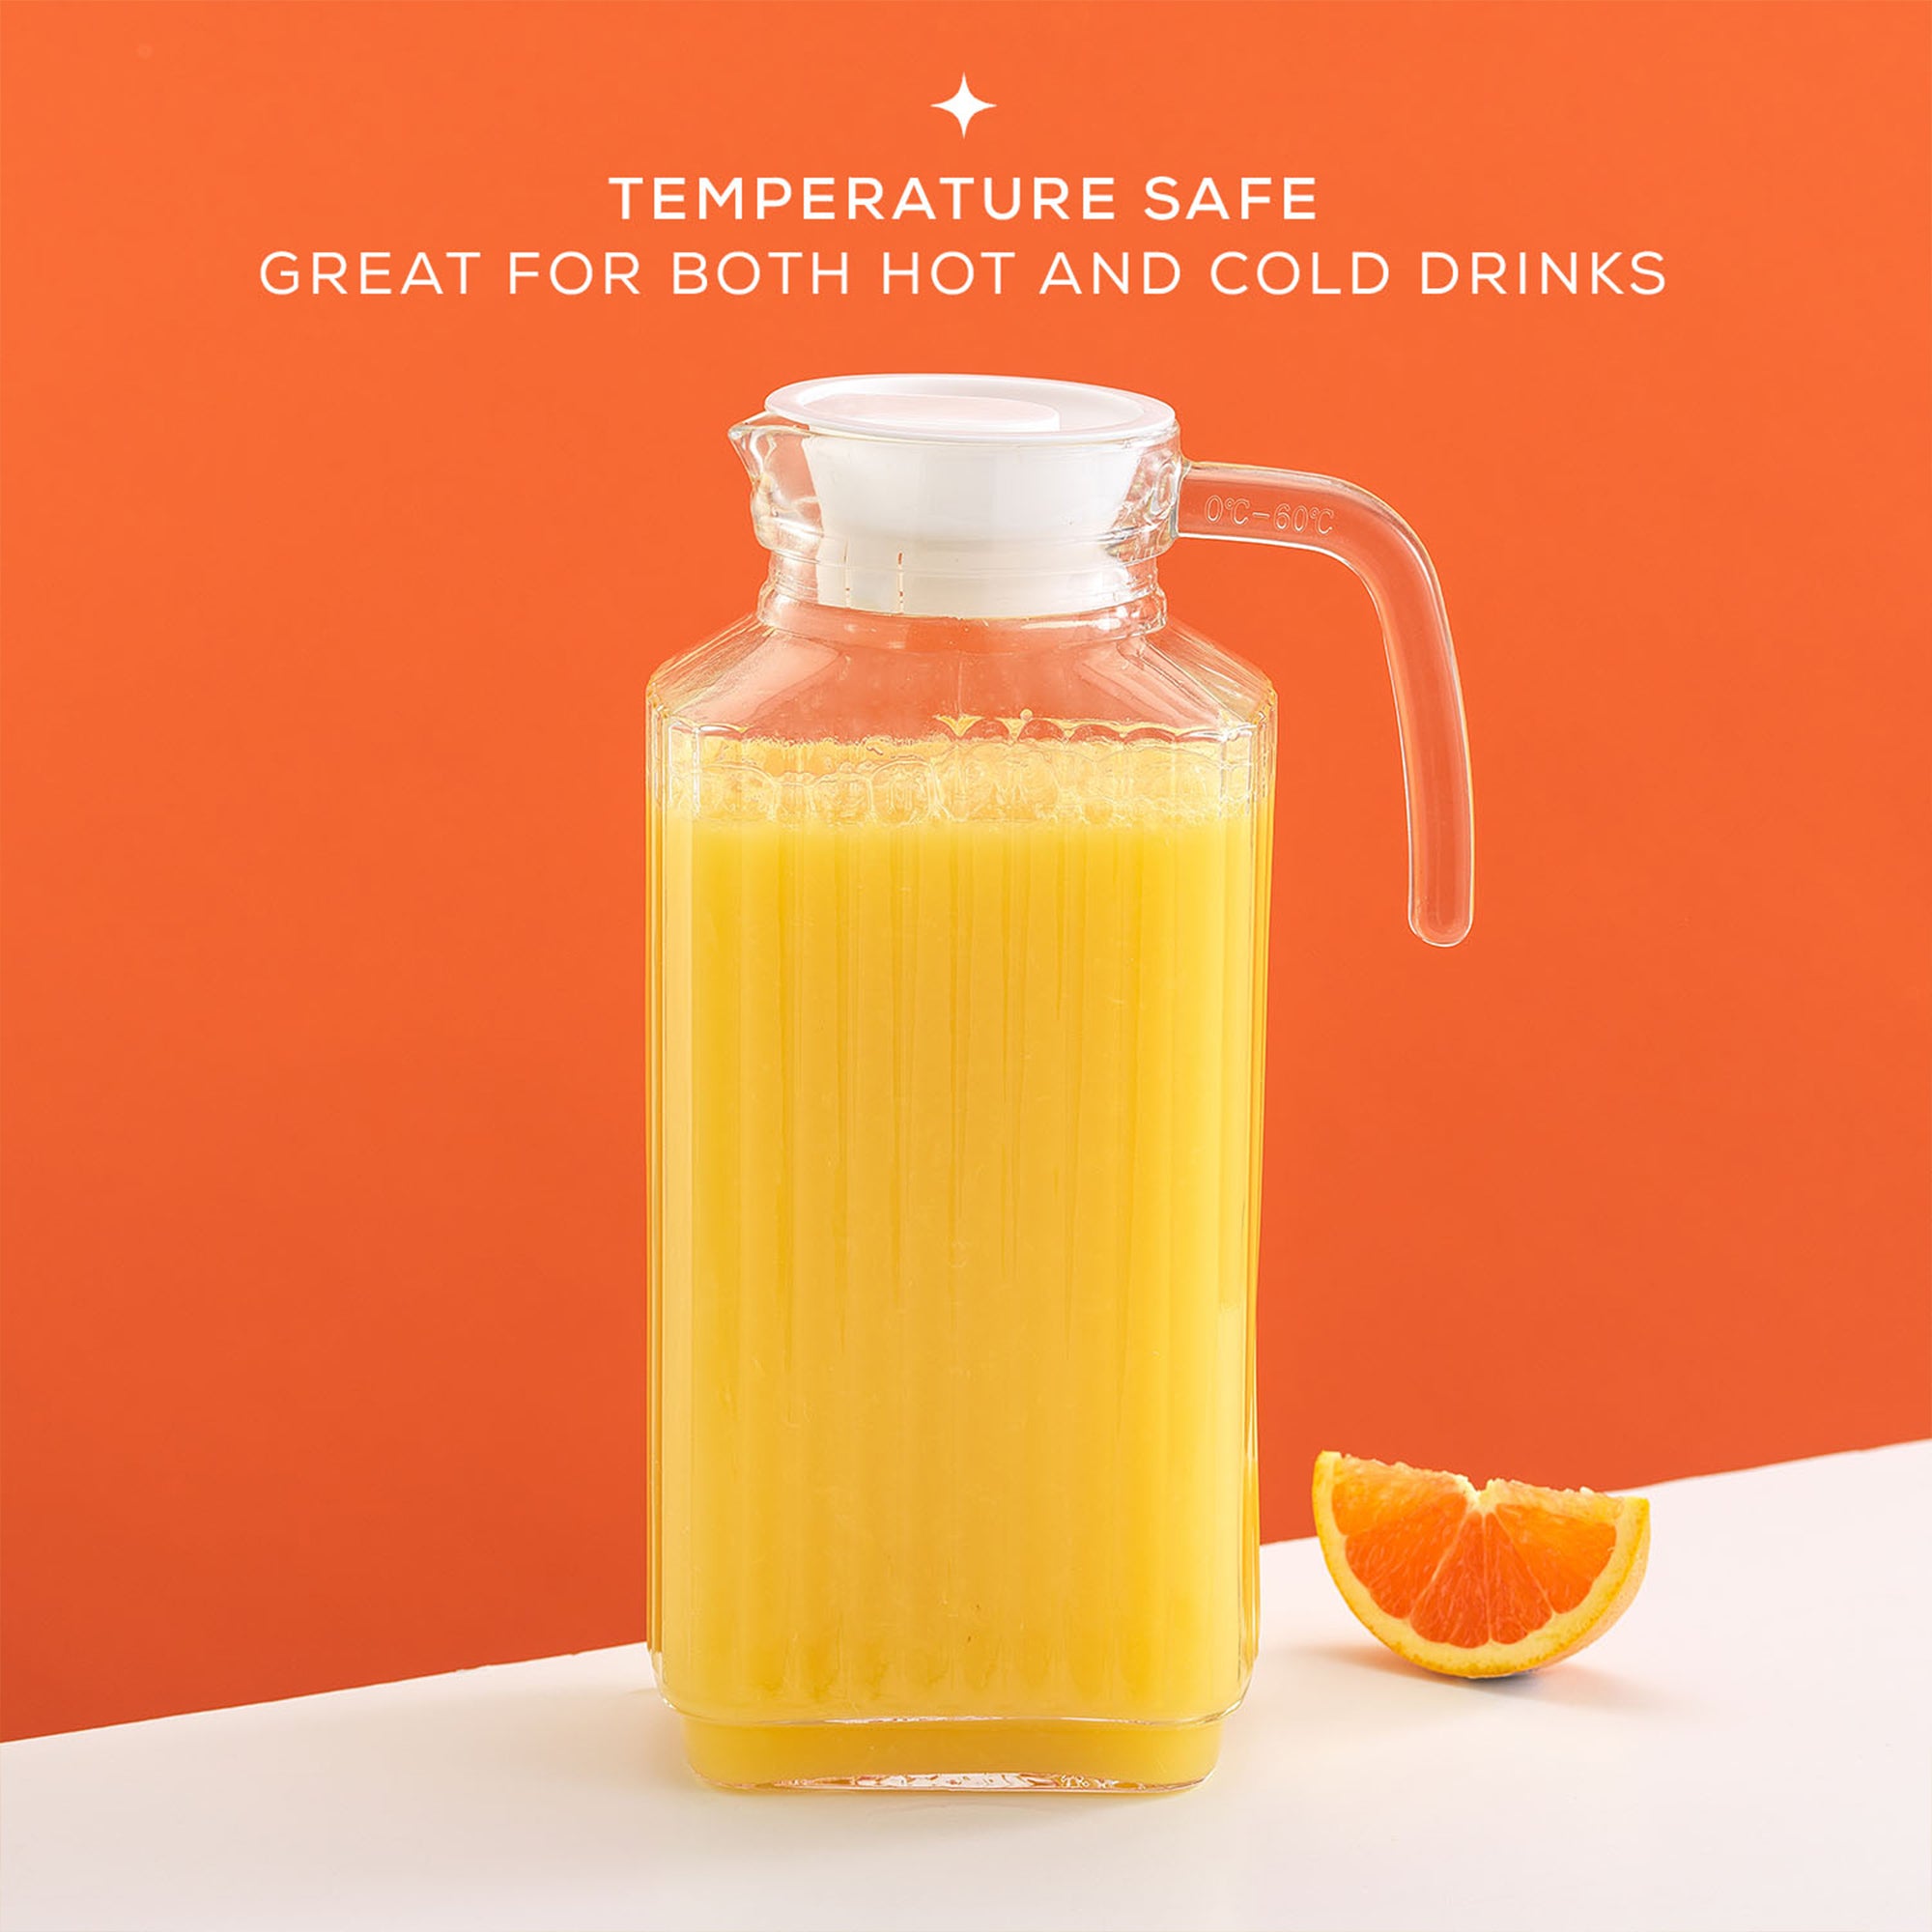 A 60-ounce JoyJolt Beverage Serveware Glass Pitcher filled with orange juice sits on a table next to a single orange. The pitcher has a clear glass body and a handle for easy pouring. Text on the image reads "TEMPERATURE SAFE. GREAT FOR BOTH HOT AND COLD DRINKS".